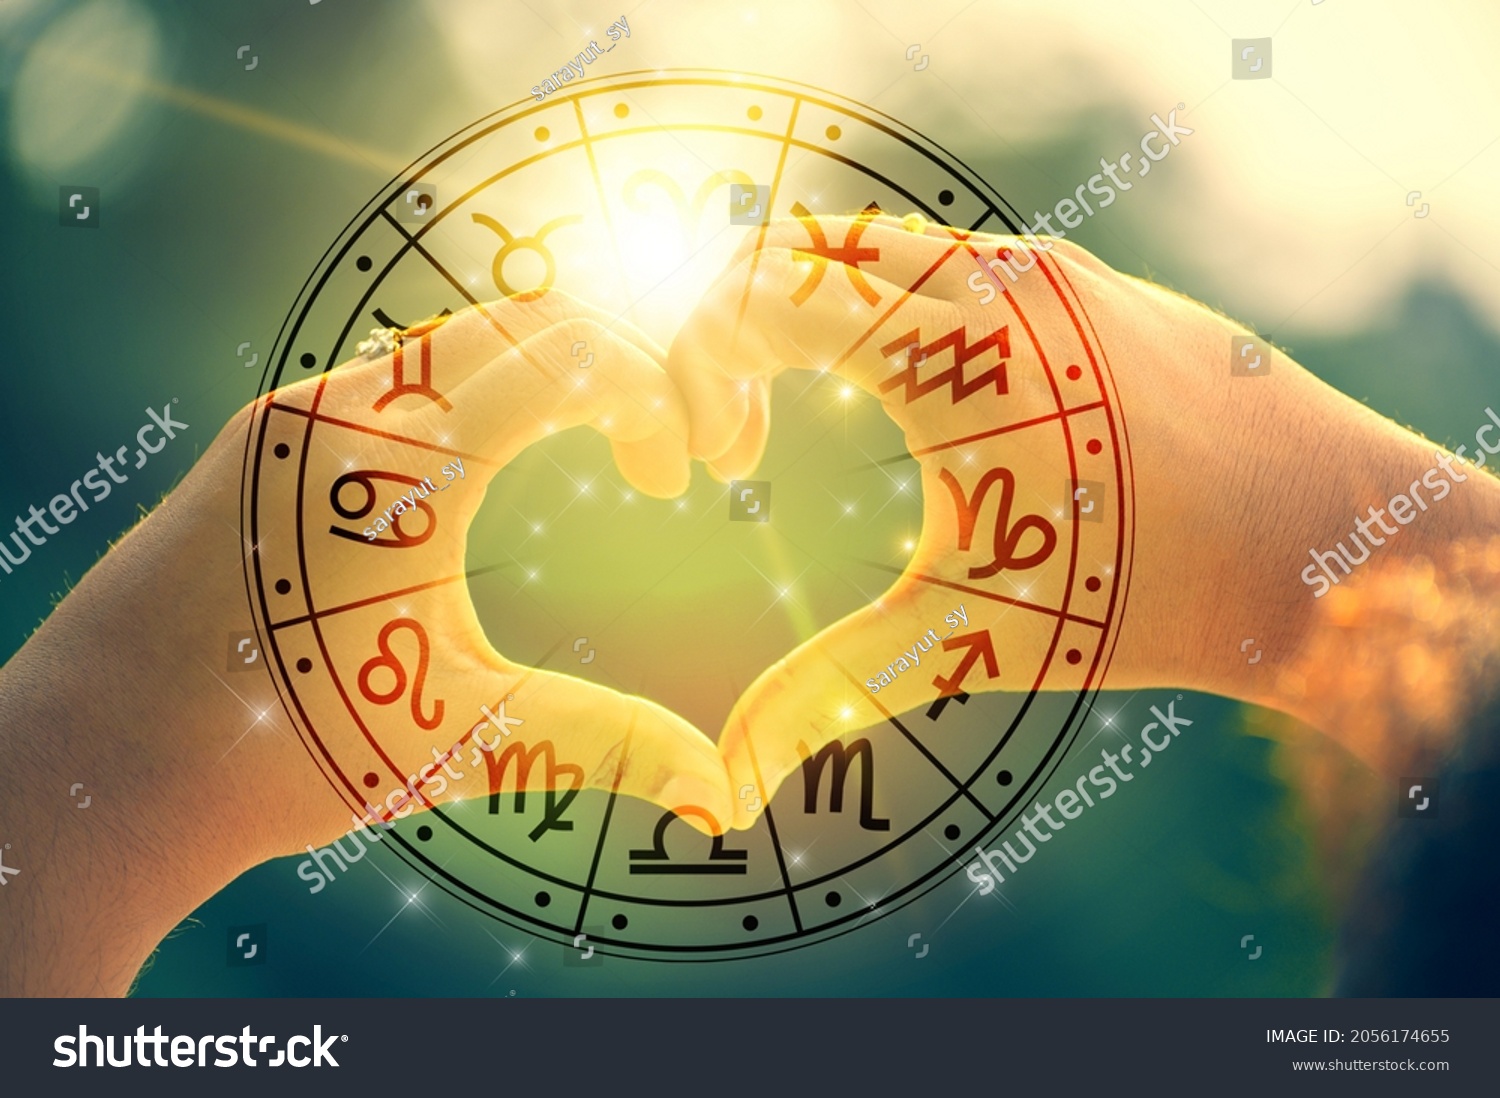 The hands of women and men are the heart shape with the sun light passing through the hands have astrological symbols #2056174655